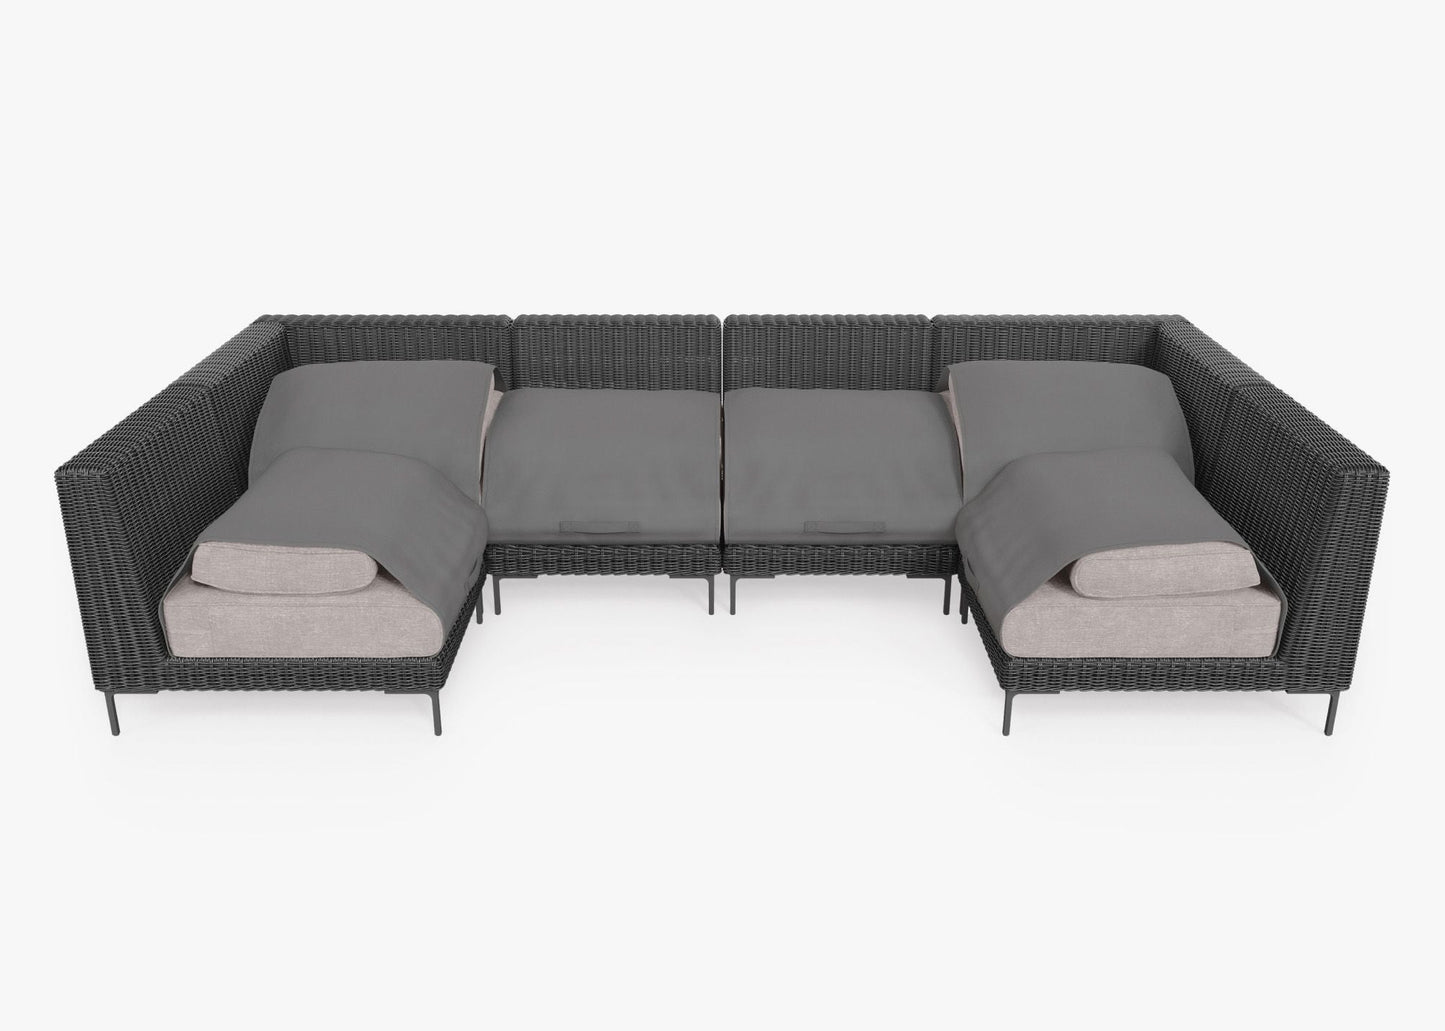 Live Outer 132" x 66" Black Wicker Outdoor U Sectional 6-Seat With Sandstone Gray Cushion